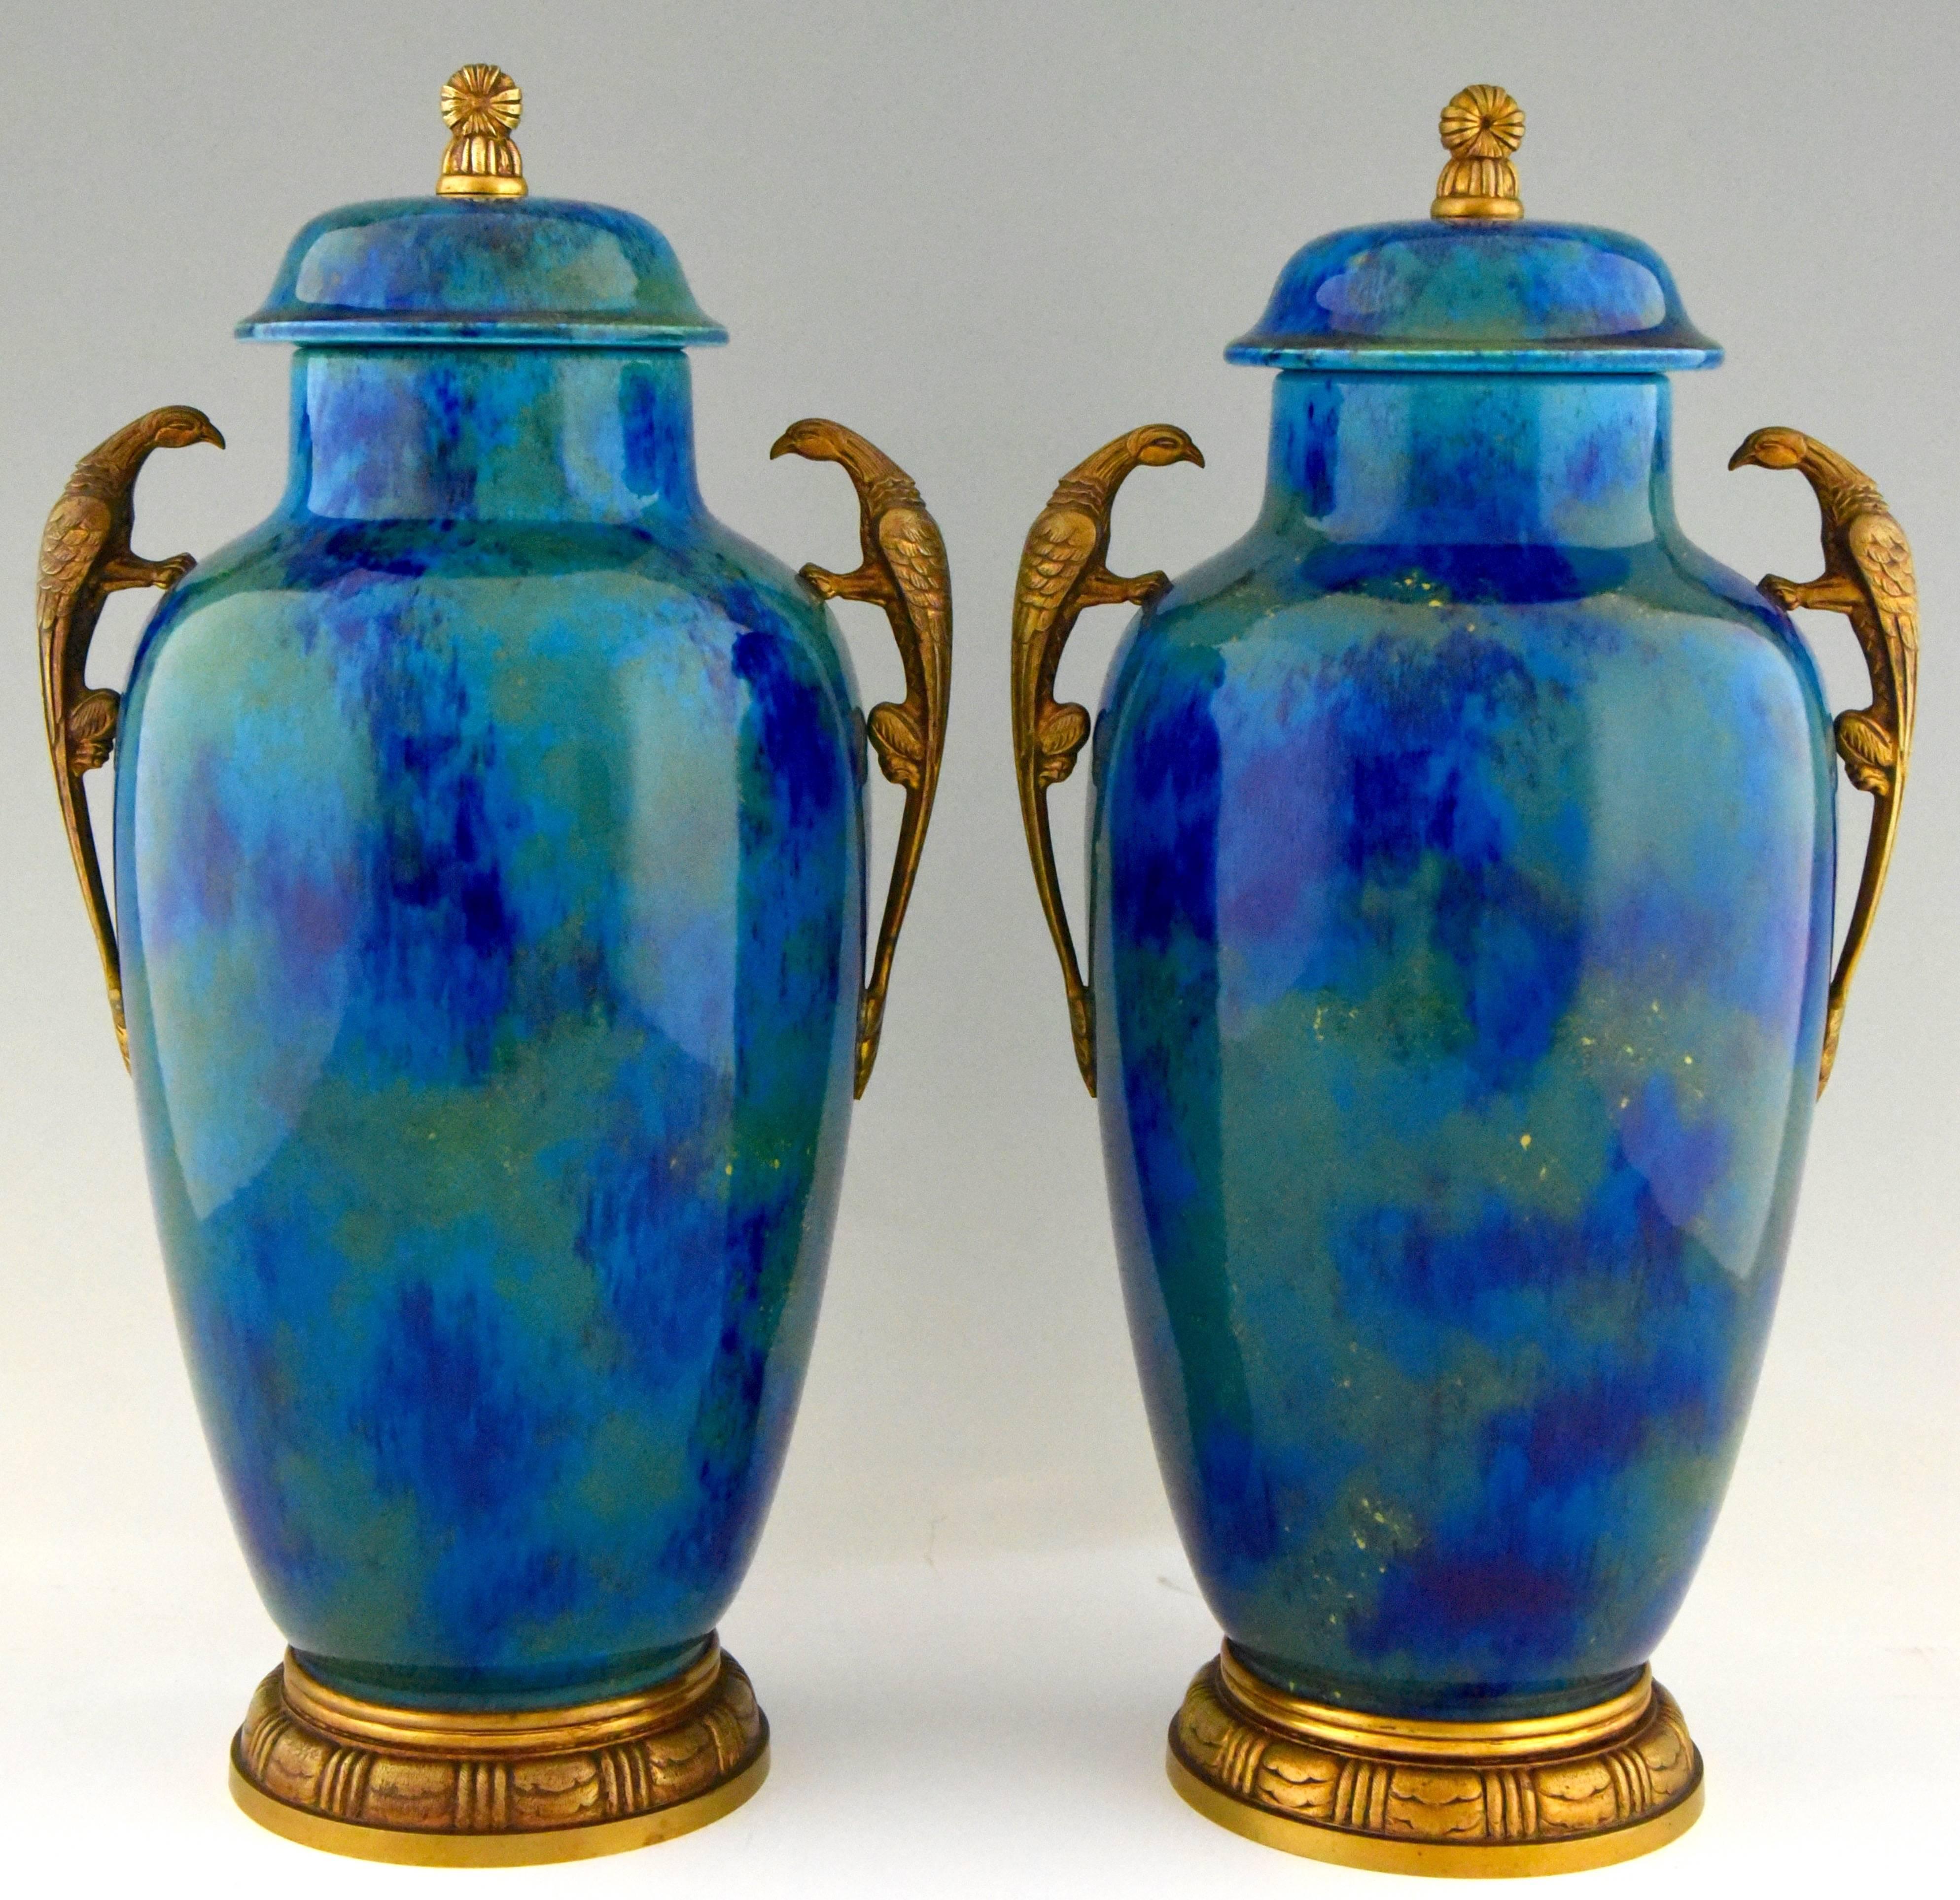 Pair of impressive Art Deco vases of baluster form with covers. A beautiful glaze in various blue, aqua, green and gold tones. The vases are raised on a gilt bronze feet, have bird shape handles and are marked P.M. Sevres.
Artist/ maker: Paul Milet